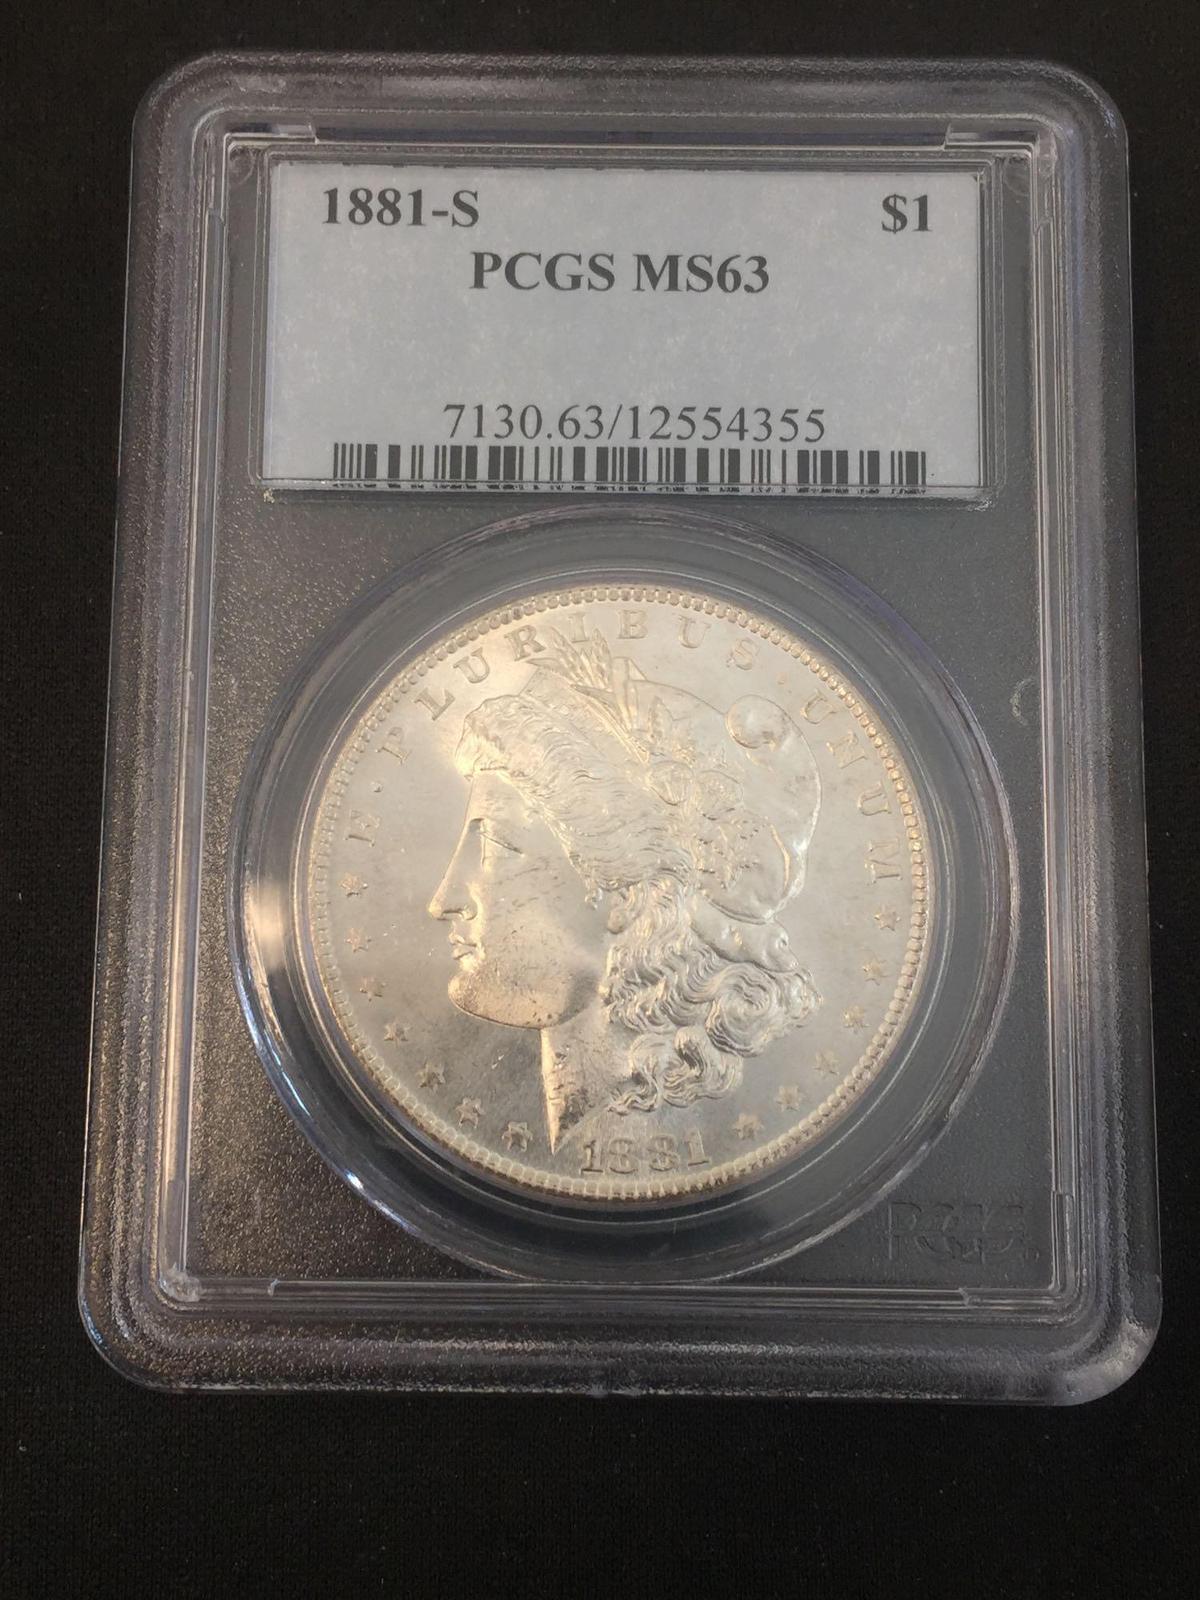 PCGS Graded 1881-S United States Morgan Silver Dollar - 90% Silver Coin - MS 63